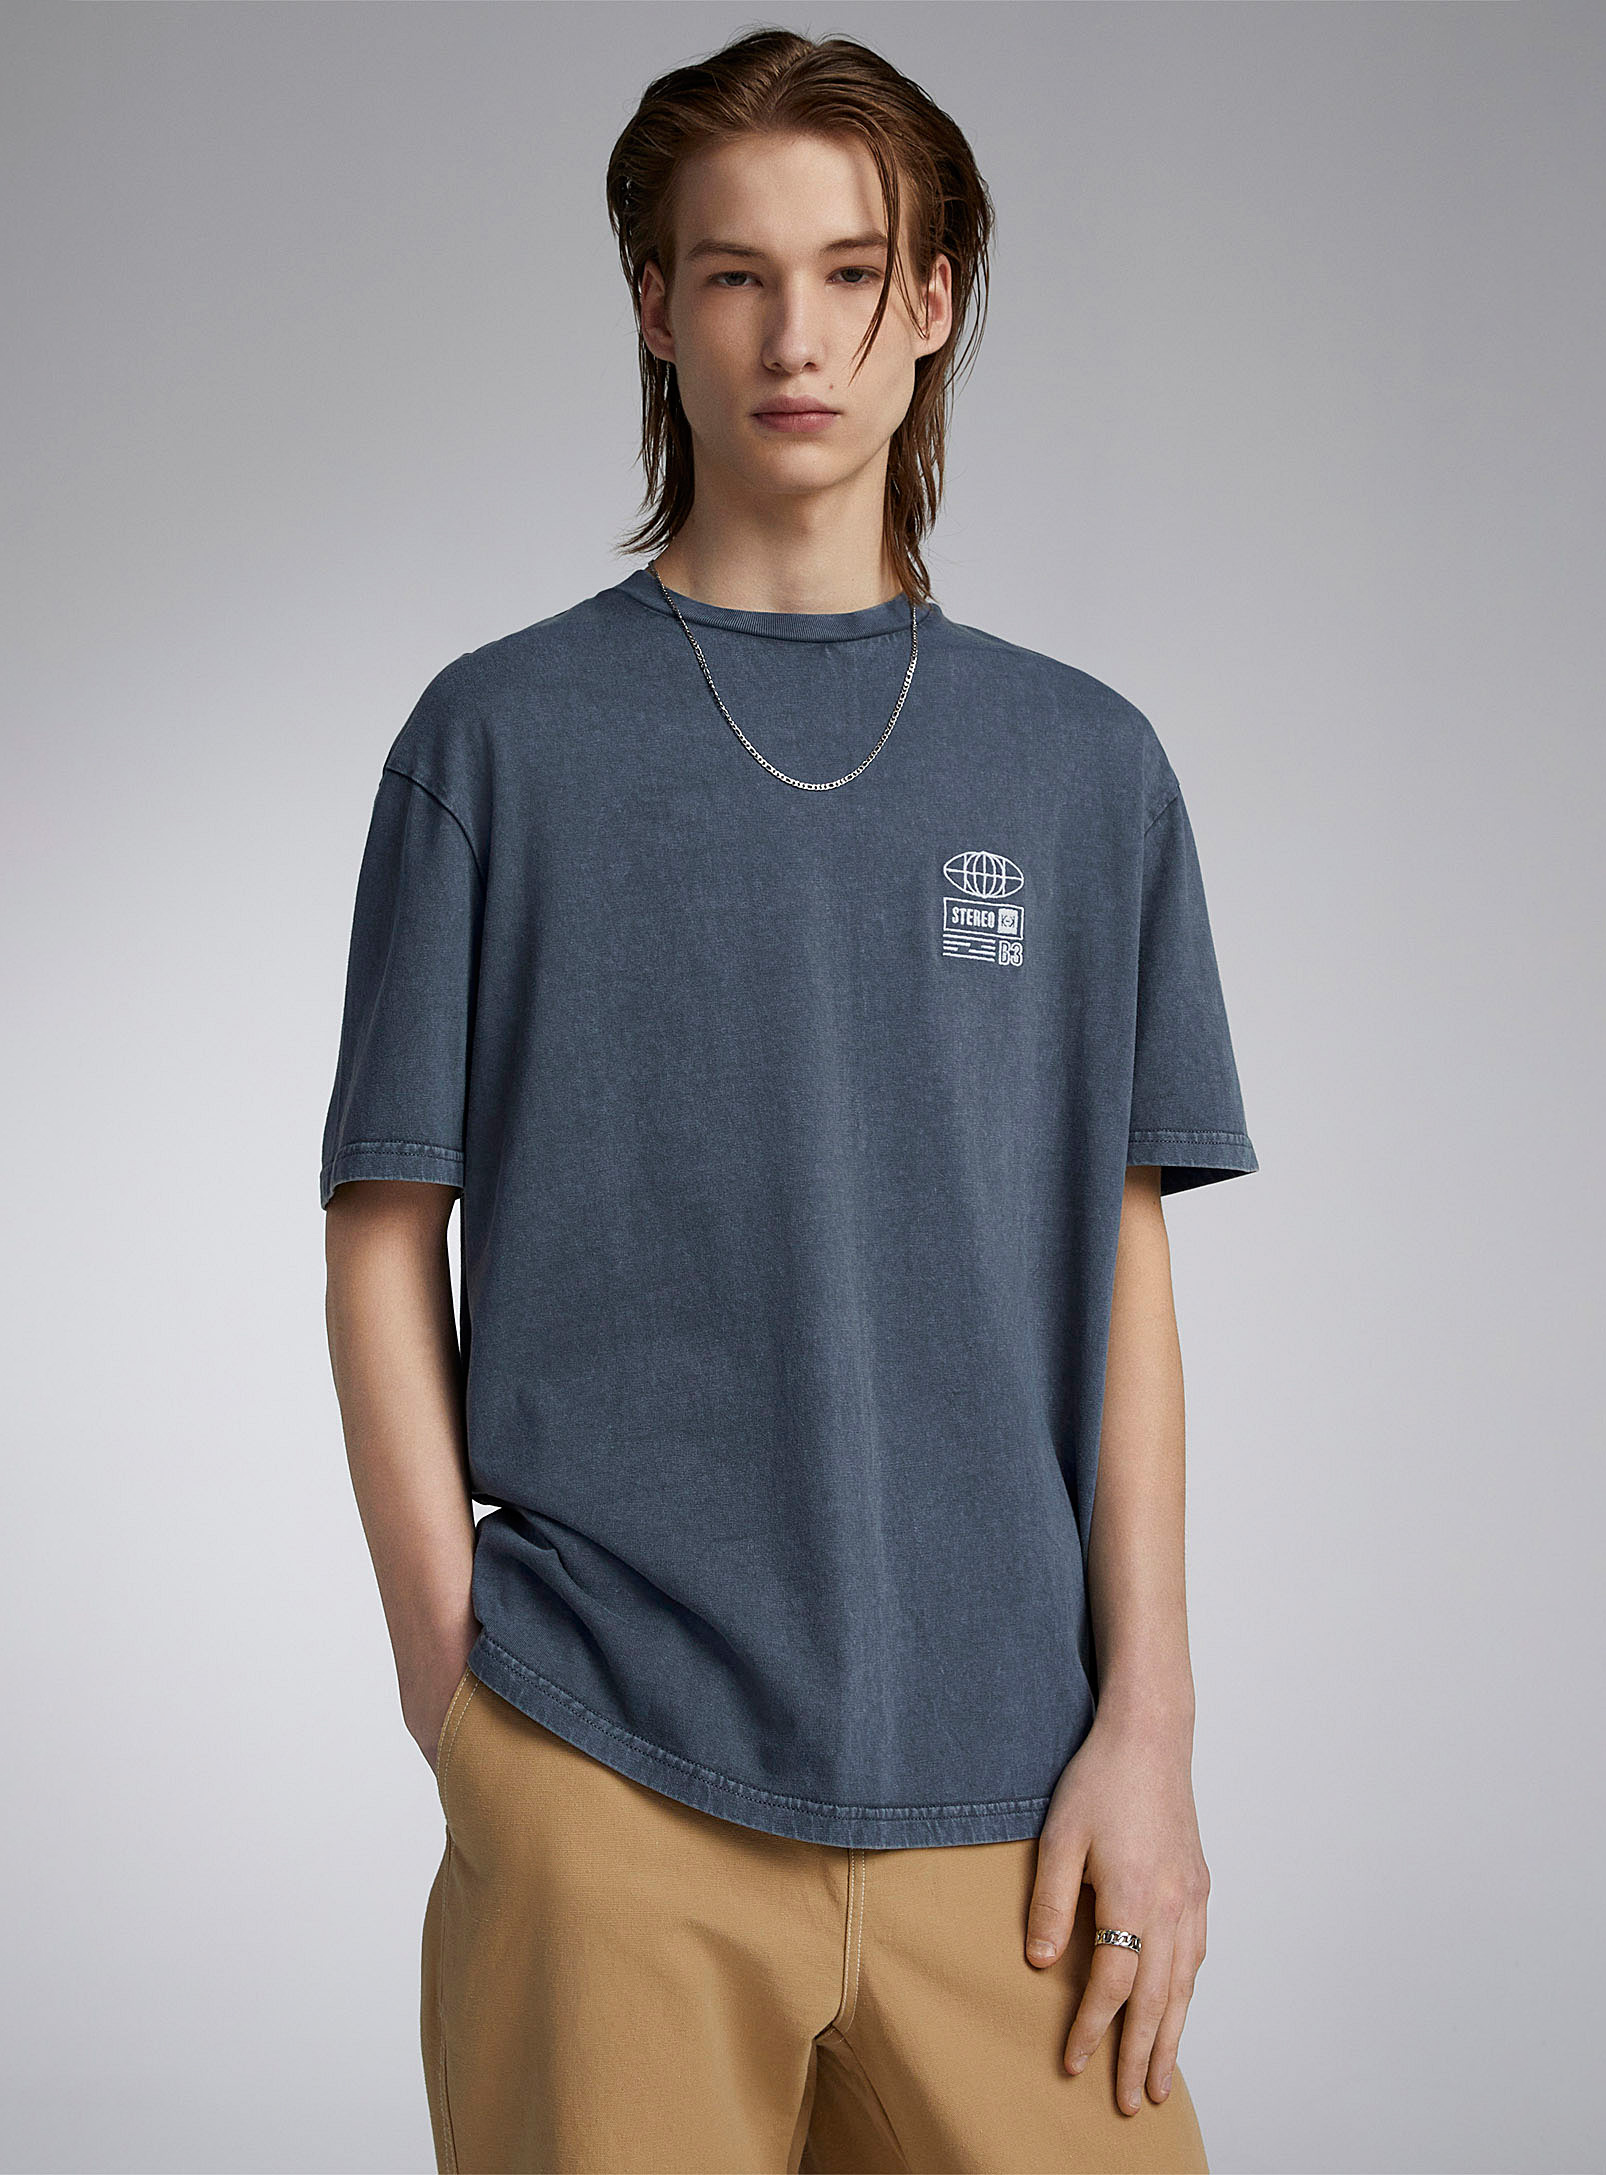 Djab Chest Embroidery Faded-look T-shirt In Marine Blue